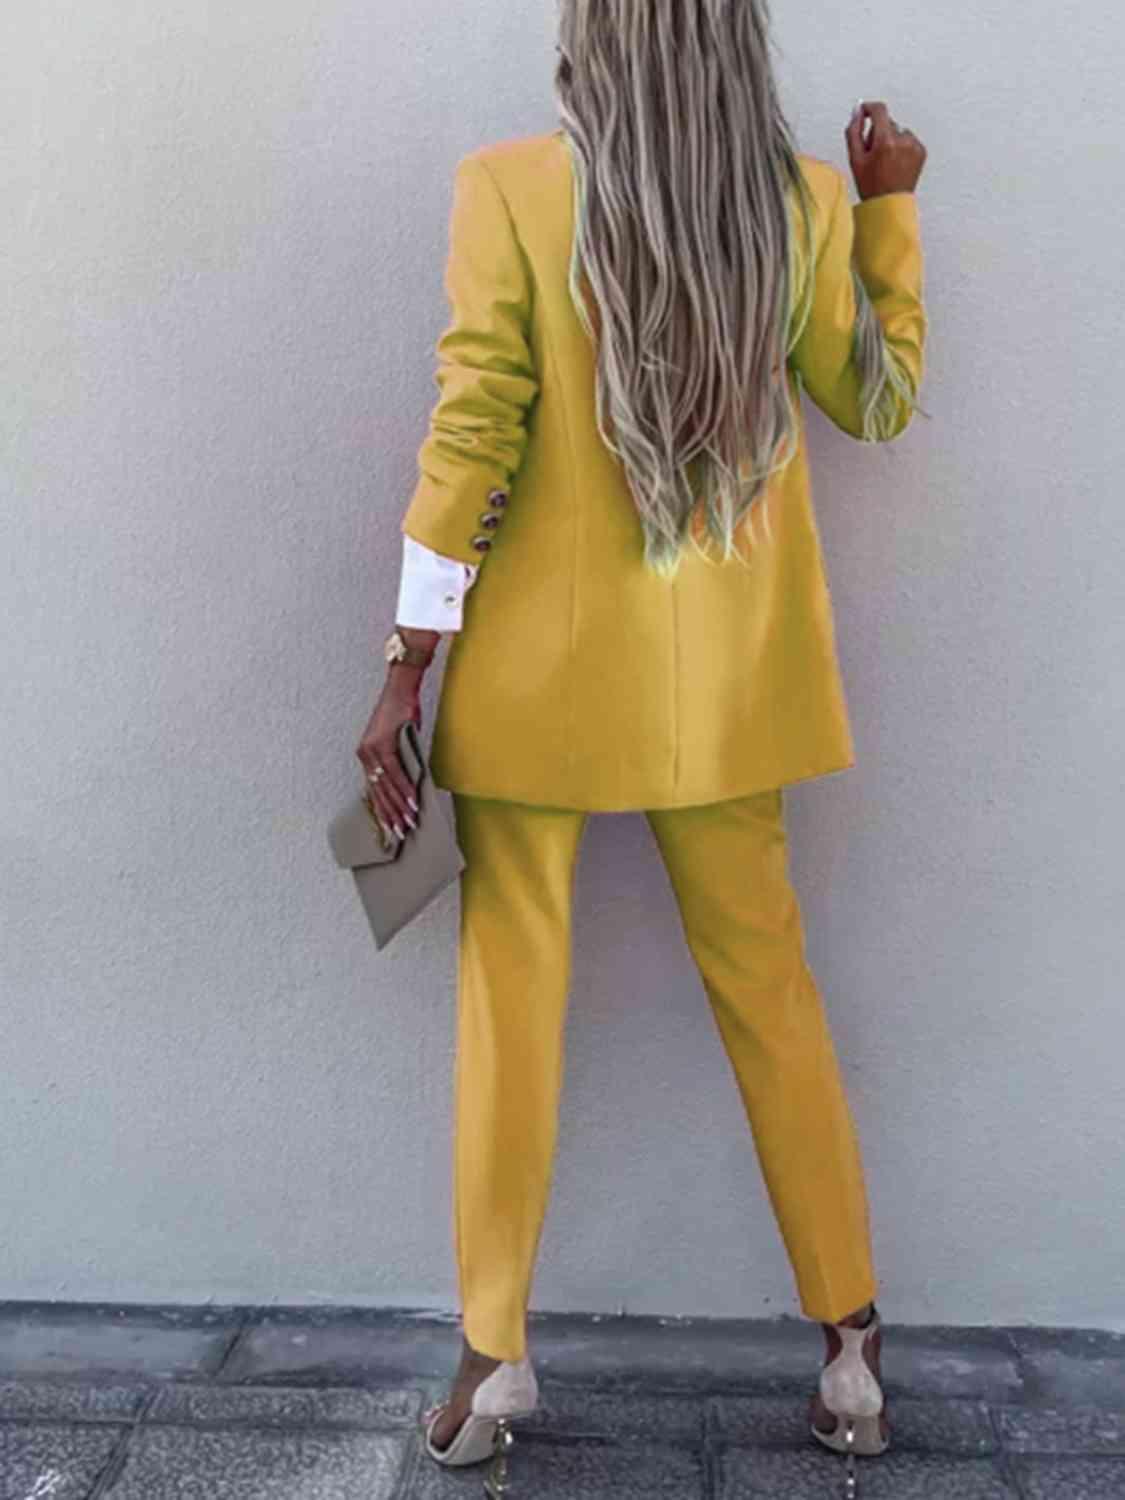 a woman in a yellow suit standing against a wall